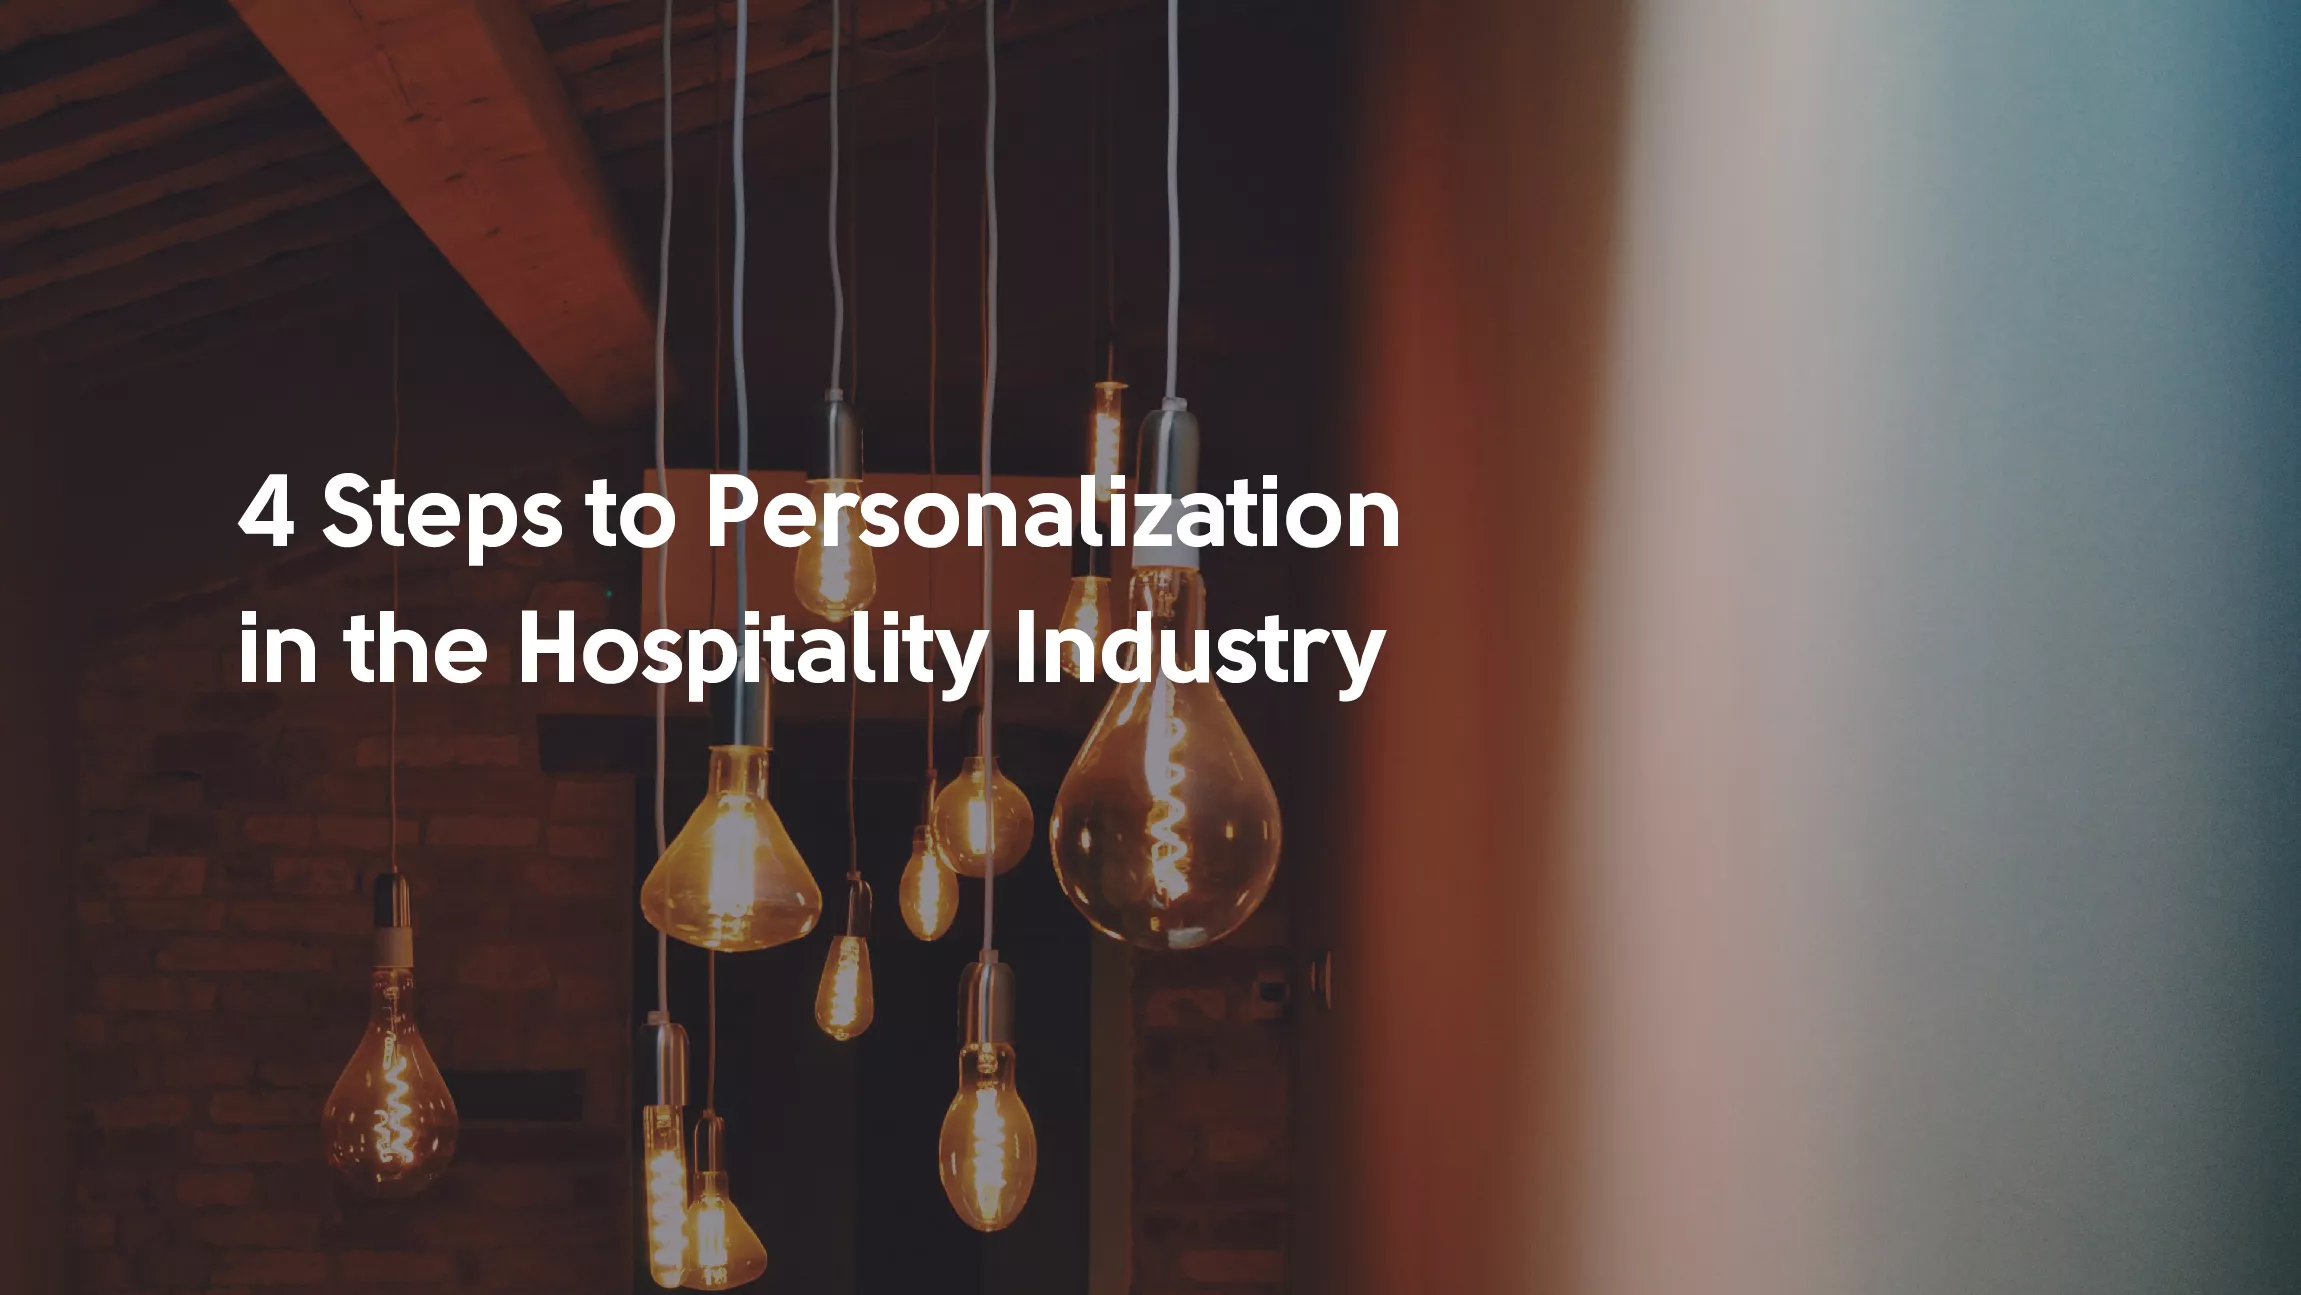 Personalization in the hospitality industry